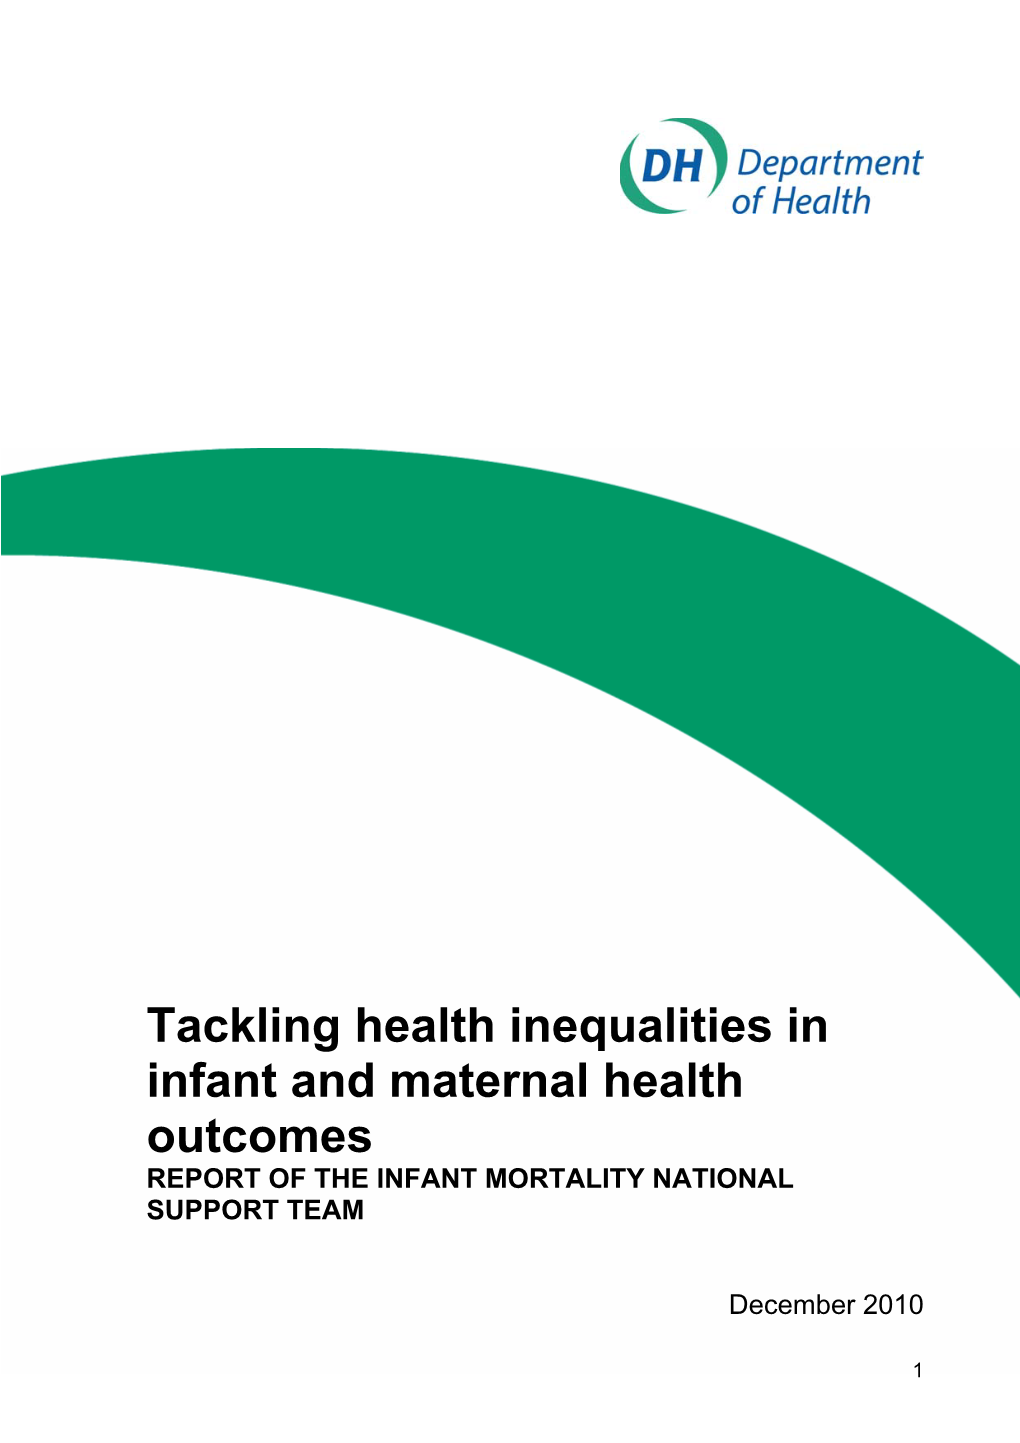 Tackling Health Inequalities in Infant and Maternal Health Outcomes REPORT of the INFANT MORTALITY NATIONAL SUPPORT TEAM